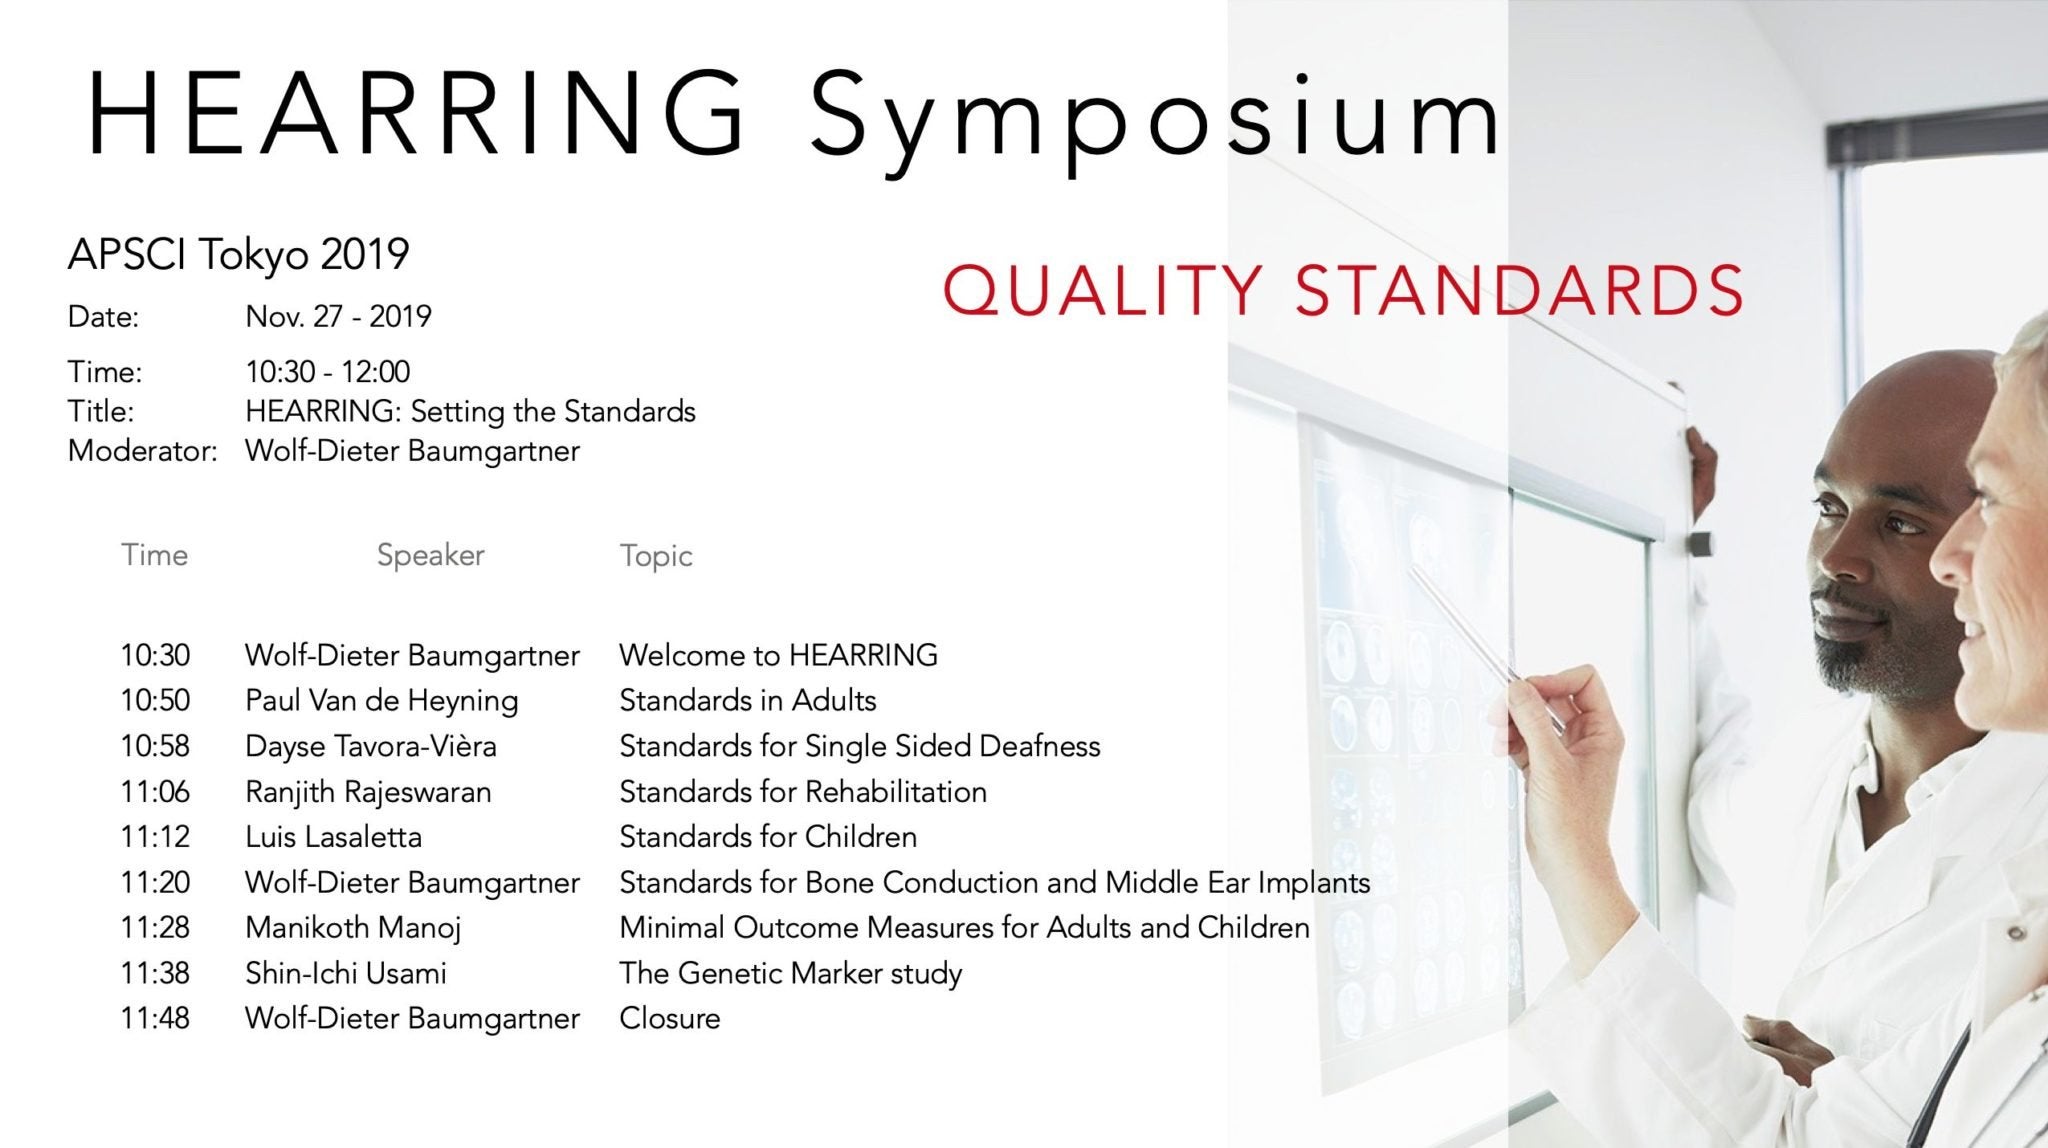 HEARRING Symposium Quality Standards